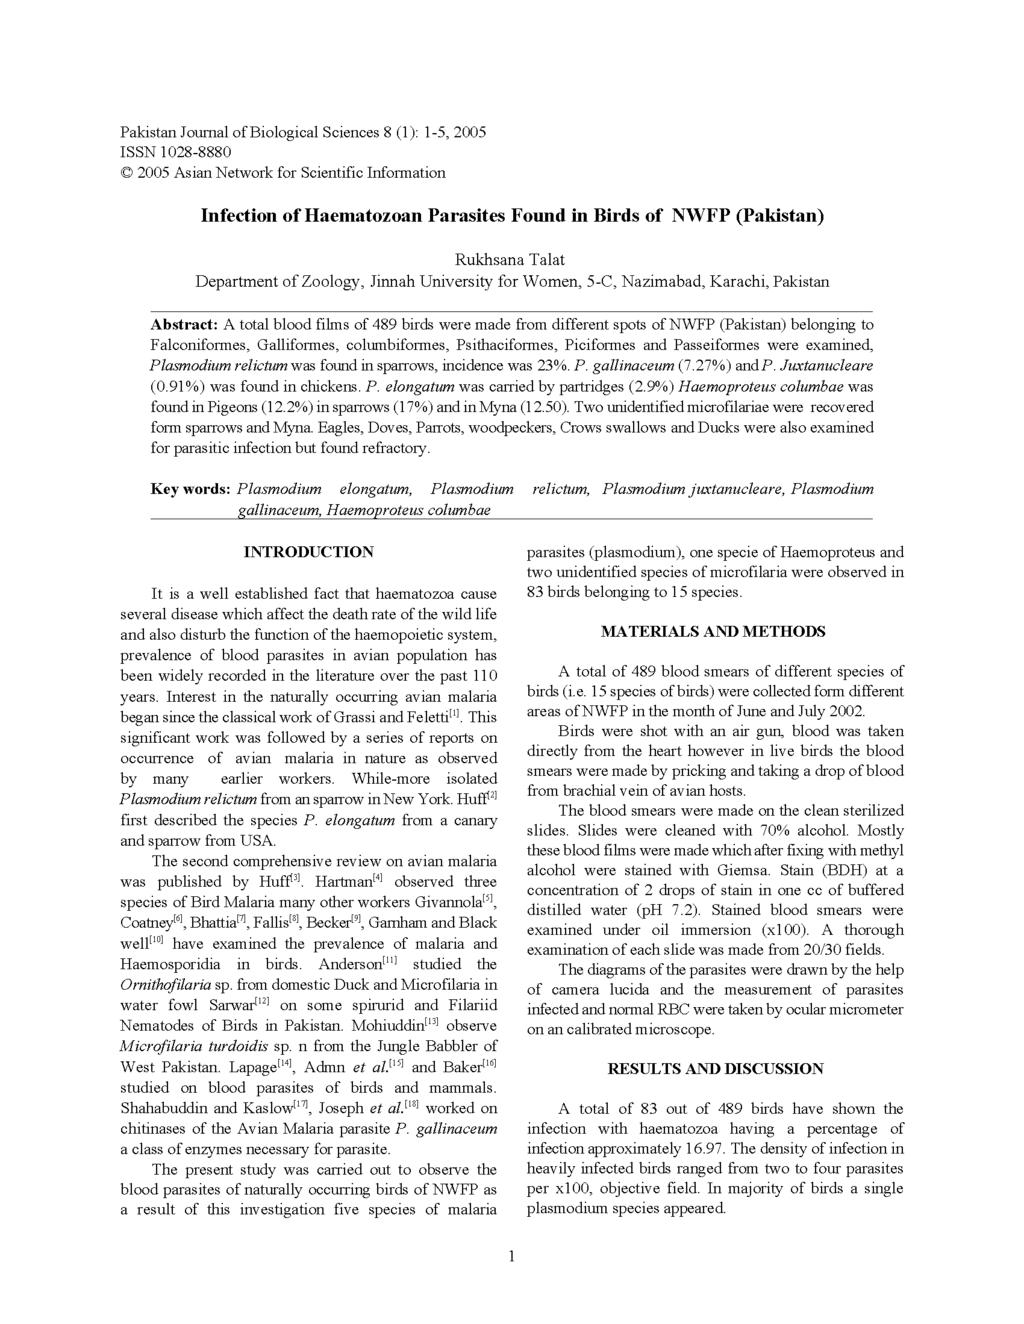 Pakistan Journal of Biological Sciences 8 (1): 1-5,2005 ISSN 1028-8880 O 2005 Asian Network for Scientific Infomation Infection of Haematozoan Parasites Found in Birds of NWFP (Pakistan) Rukhsana